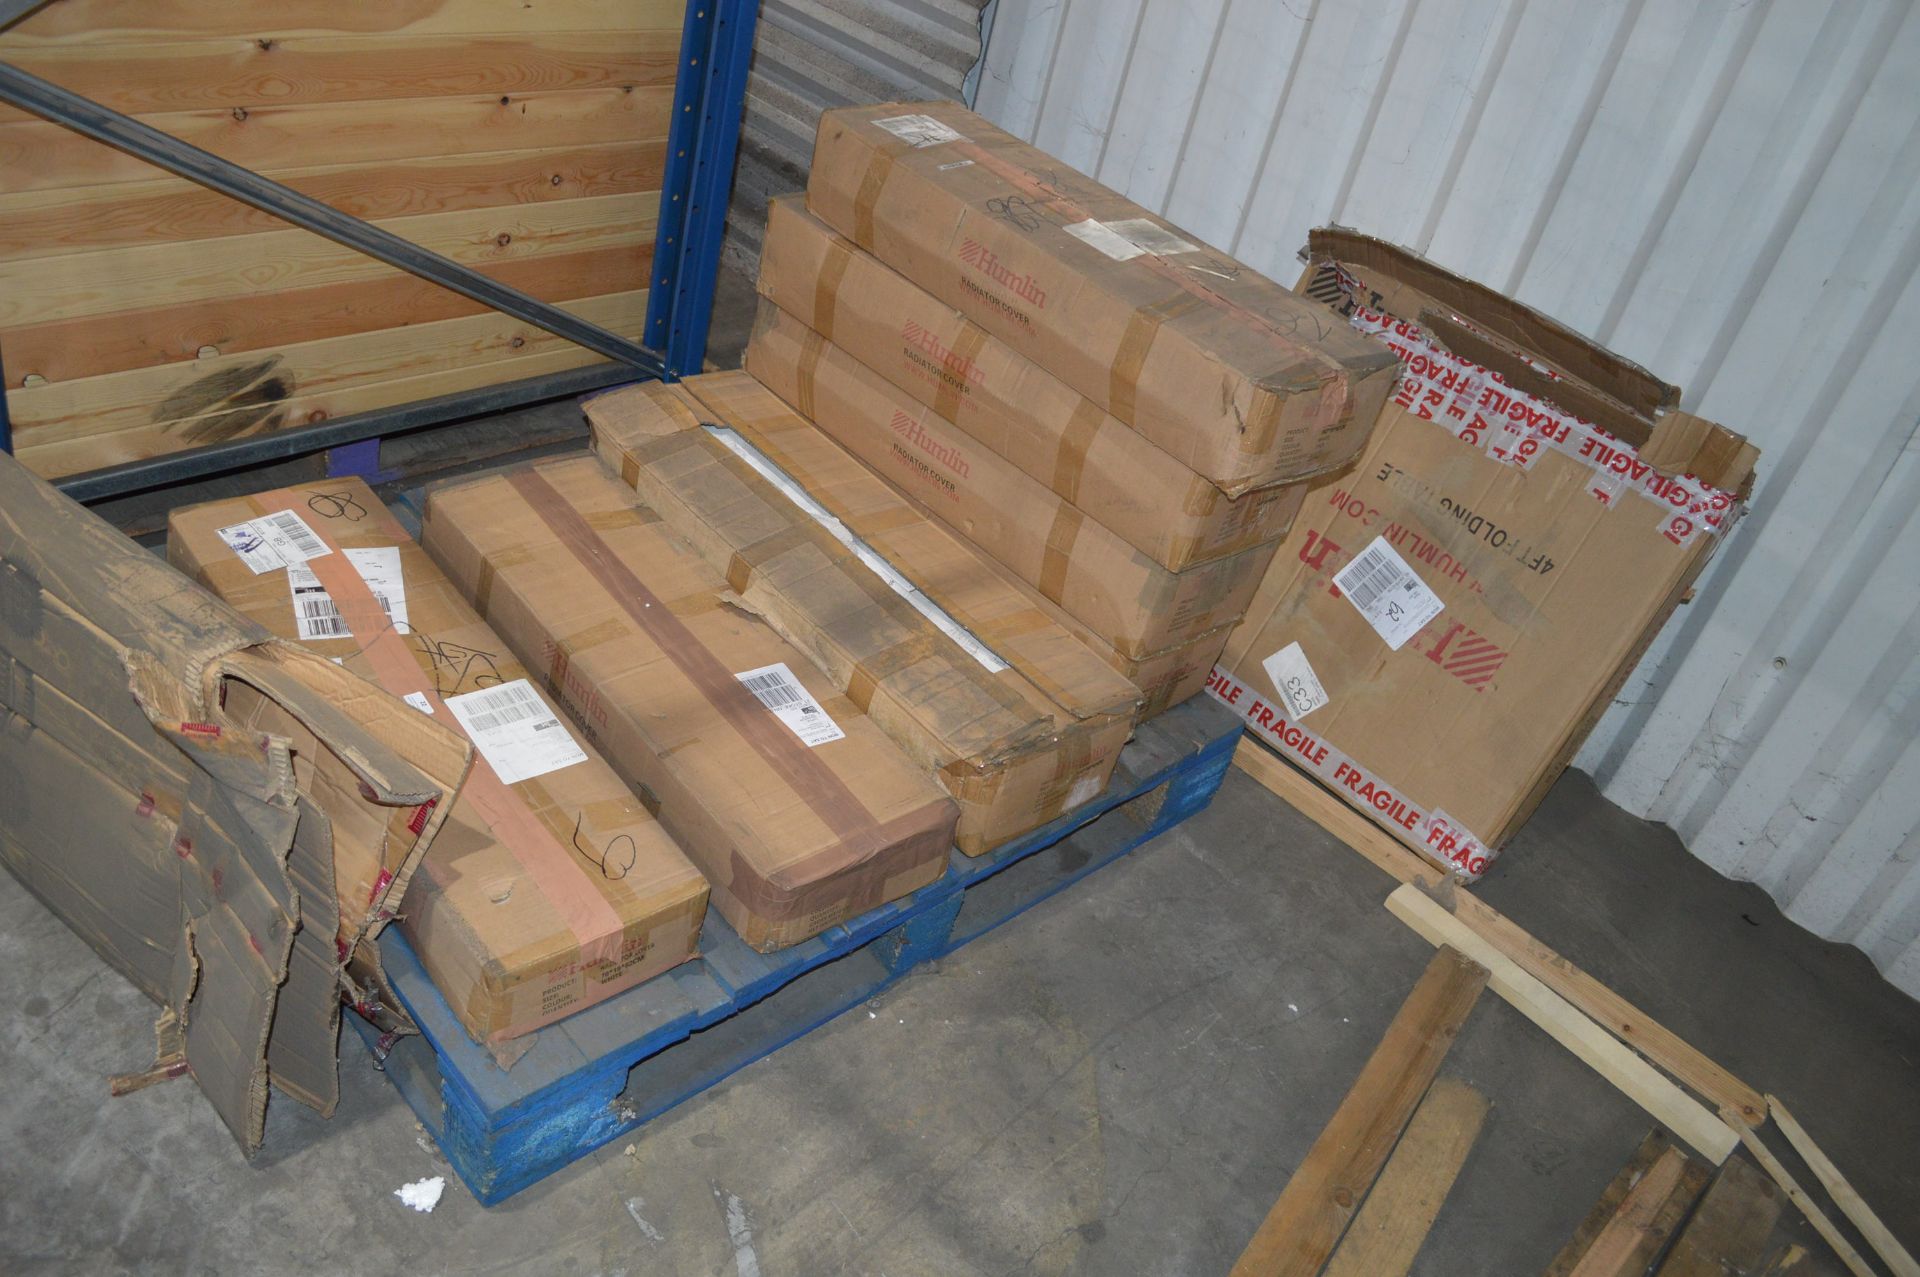 *Eight Boxes of Humlin Radiator Covers